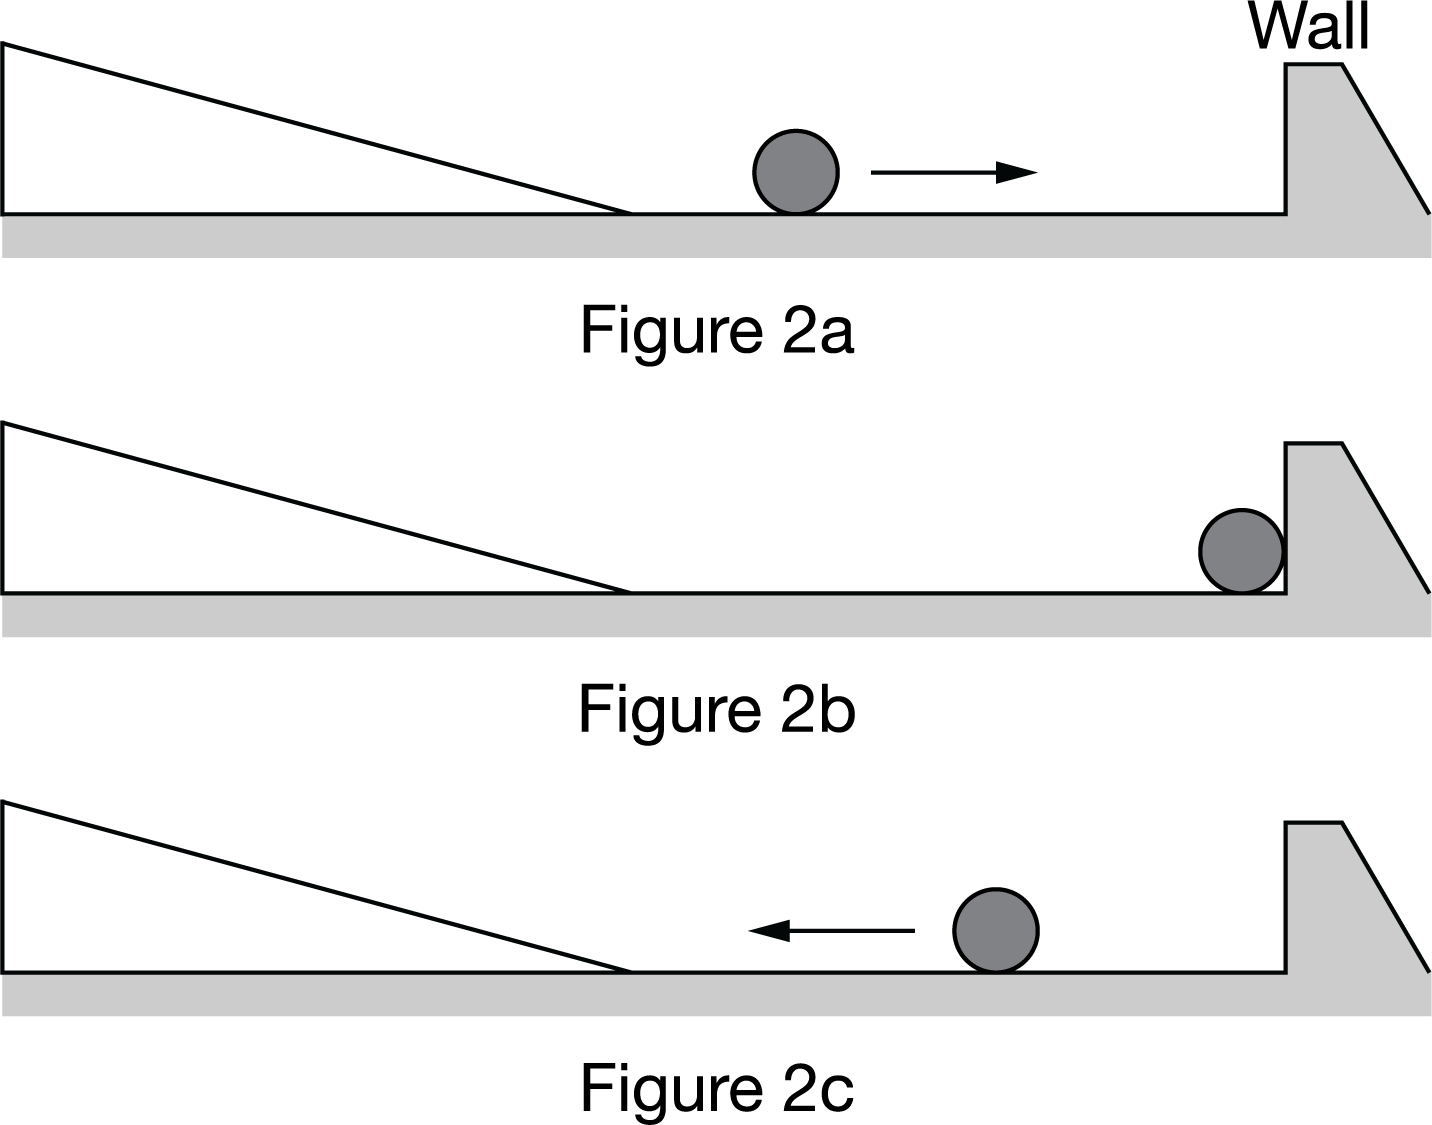 The figure presents 3 diagrams labeled Figure 2 a, Figure 2 b, and Figure 2 c, respectively. Each diagram has a triangle on the left side of a horizontal surface, a circle, and a vertical wall on the right side of the horizontal surface. The base of the triangle rests on the horizontal surface, the vertical leg is on the left side of the base and the hypotenuse is the incline. The horizontal surface extends to the right beyond the end of the incline and ends at the wall. In figure 2 a, the circle is on a horizontal plane just to the right of the end of the incline and a horizontal arrow to the right of the circle, points towards the wall. In figure 2 b, the right side of the circle is touching the wall. In figure 2 c, the circle is between the incline and the wall and a horizontal arrow to the left of the circle, points towards the incline.?